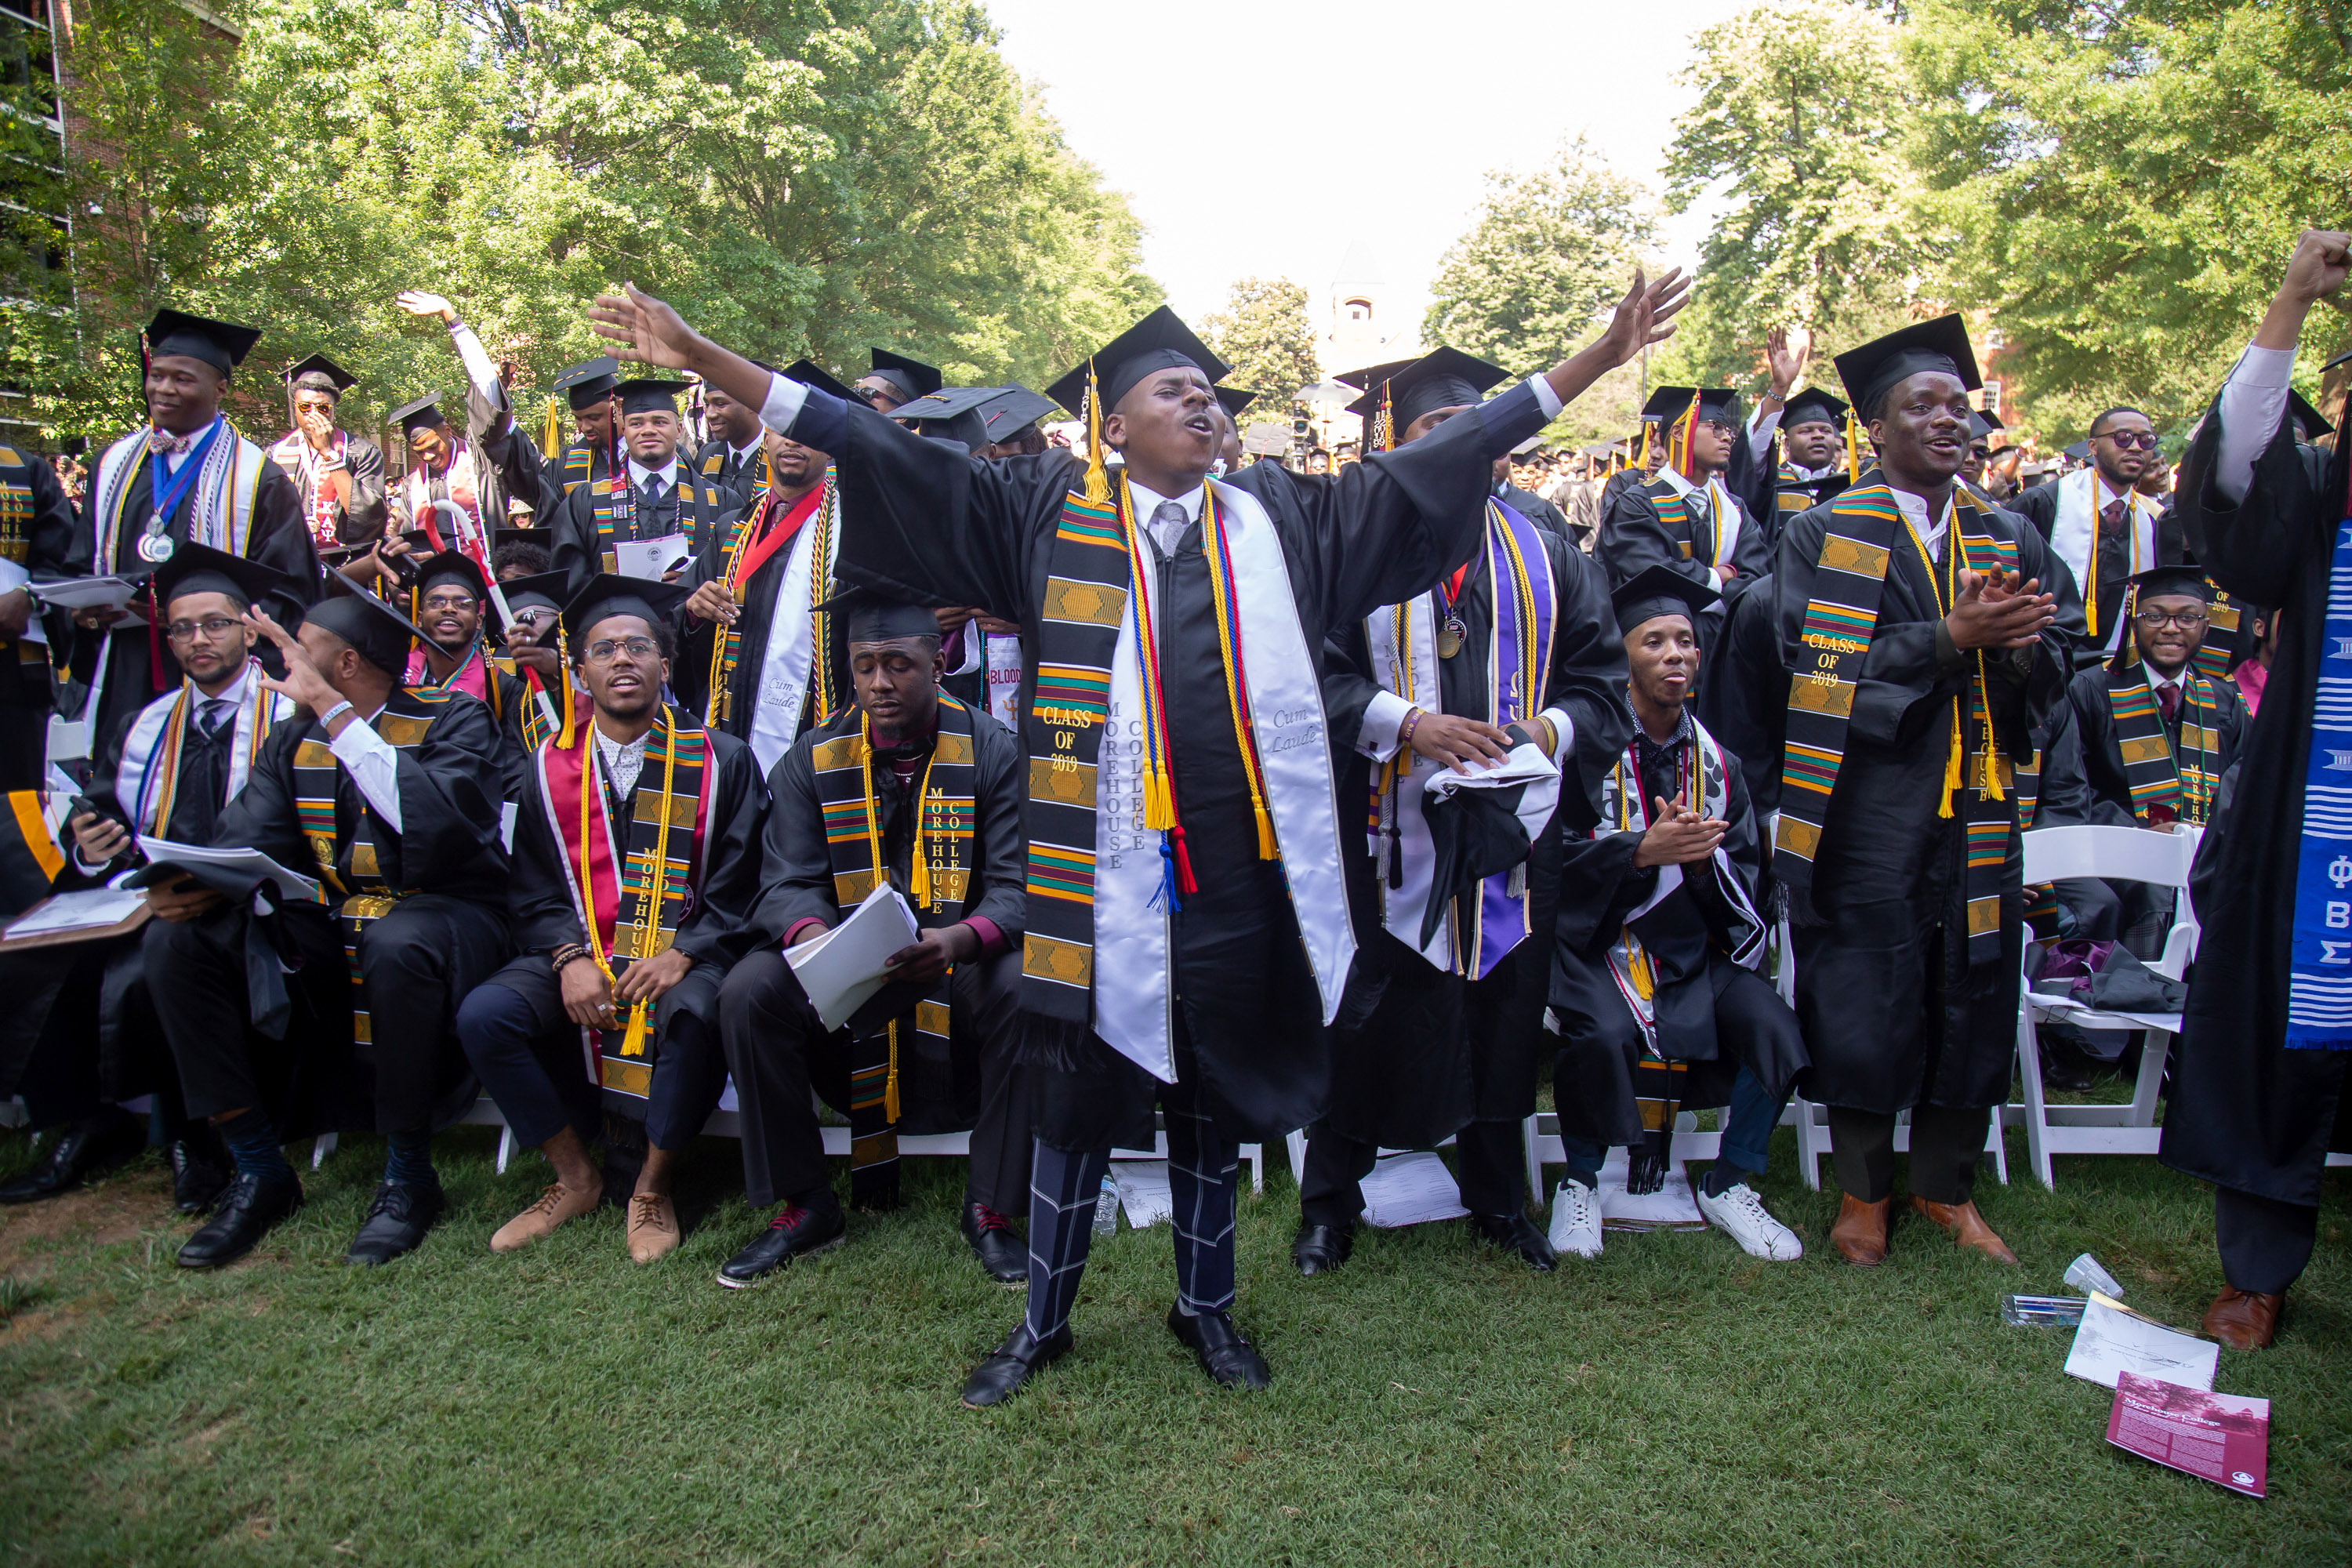 martin luther king jr graduated morehouse college